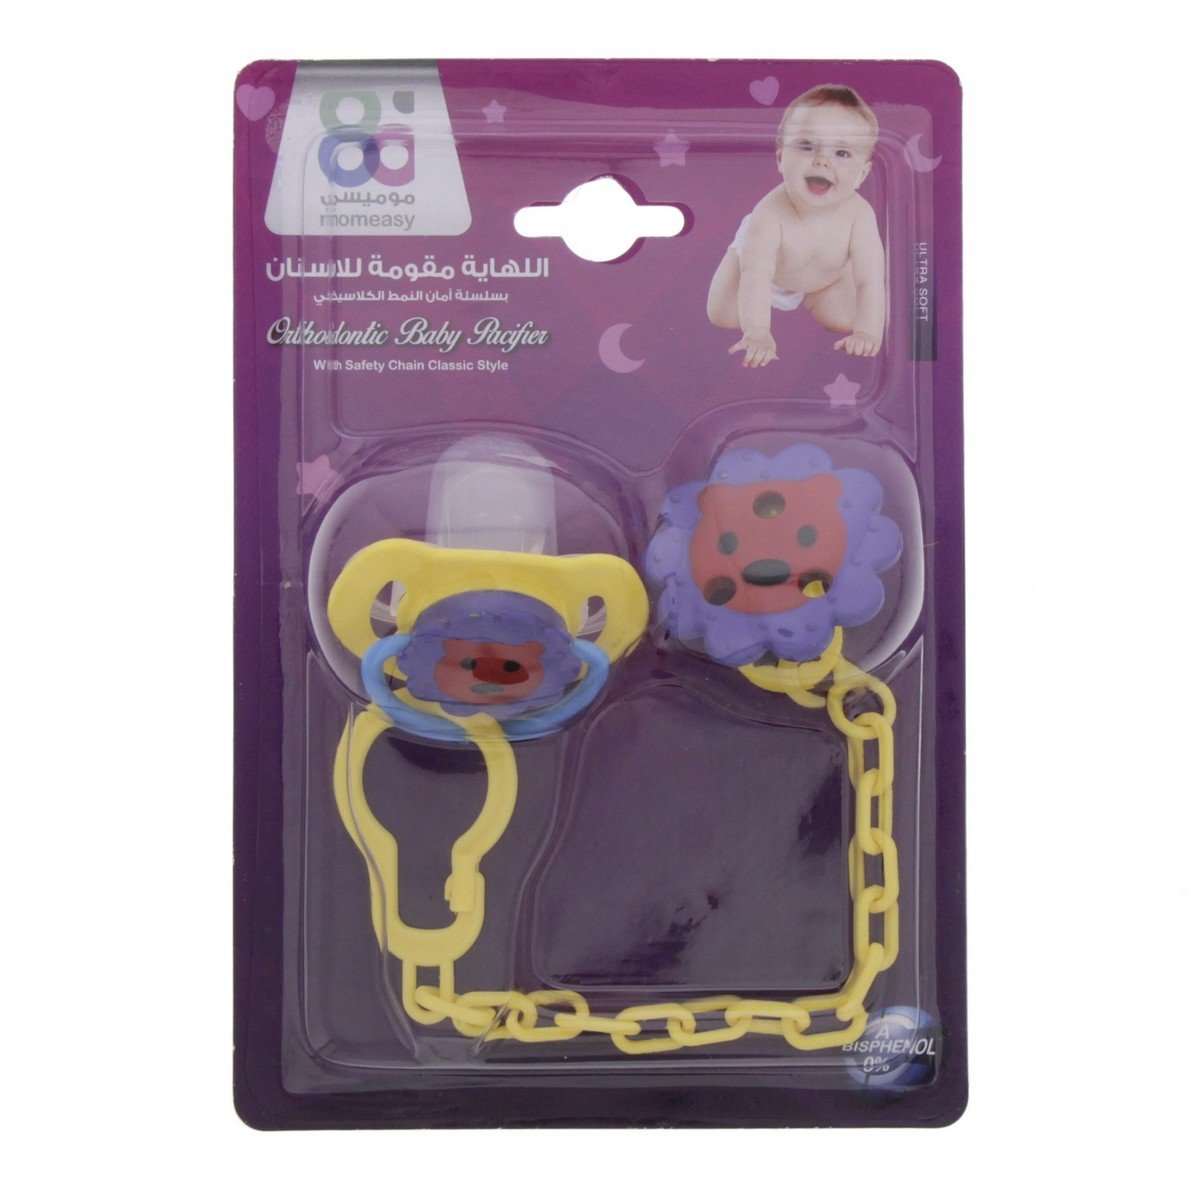 Mom Easy Baby Pacifier with Safety Chain 1 pc